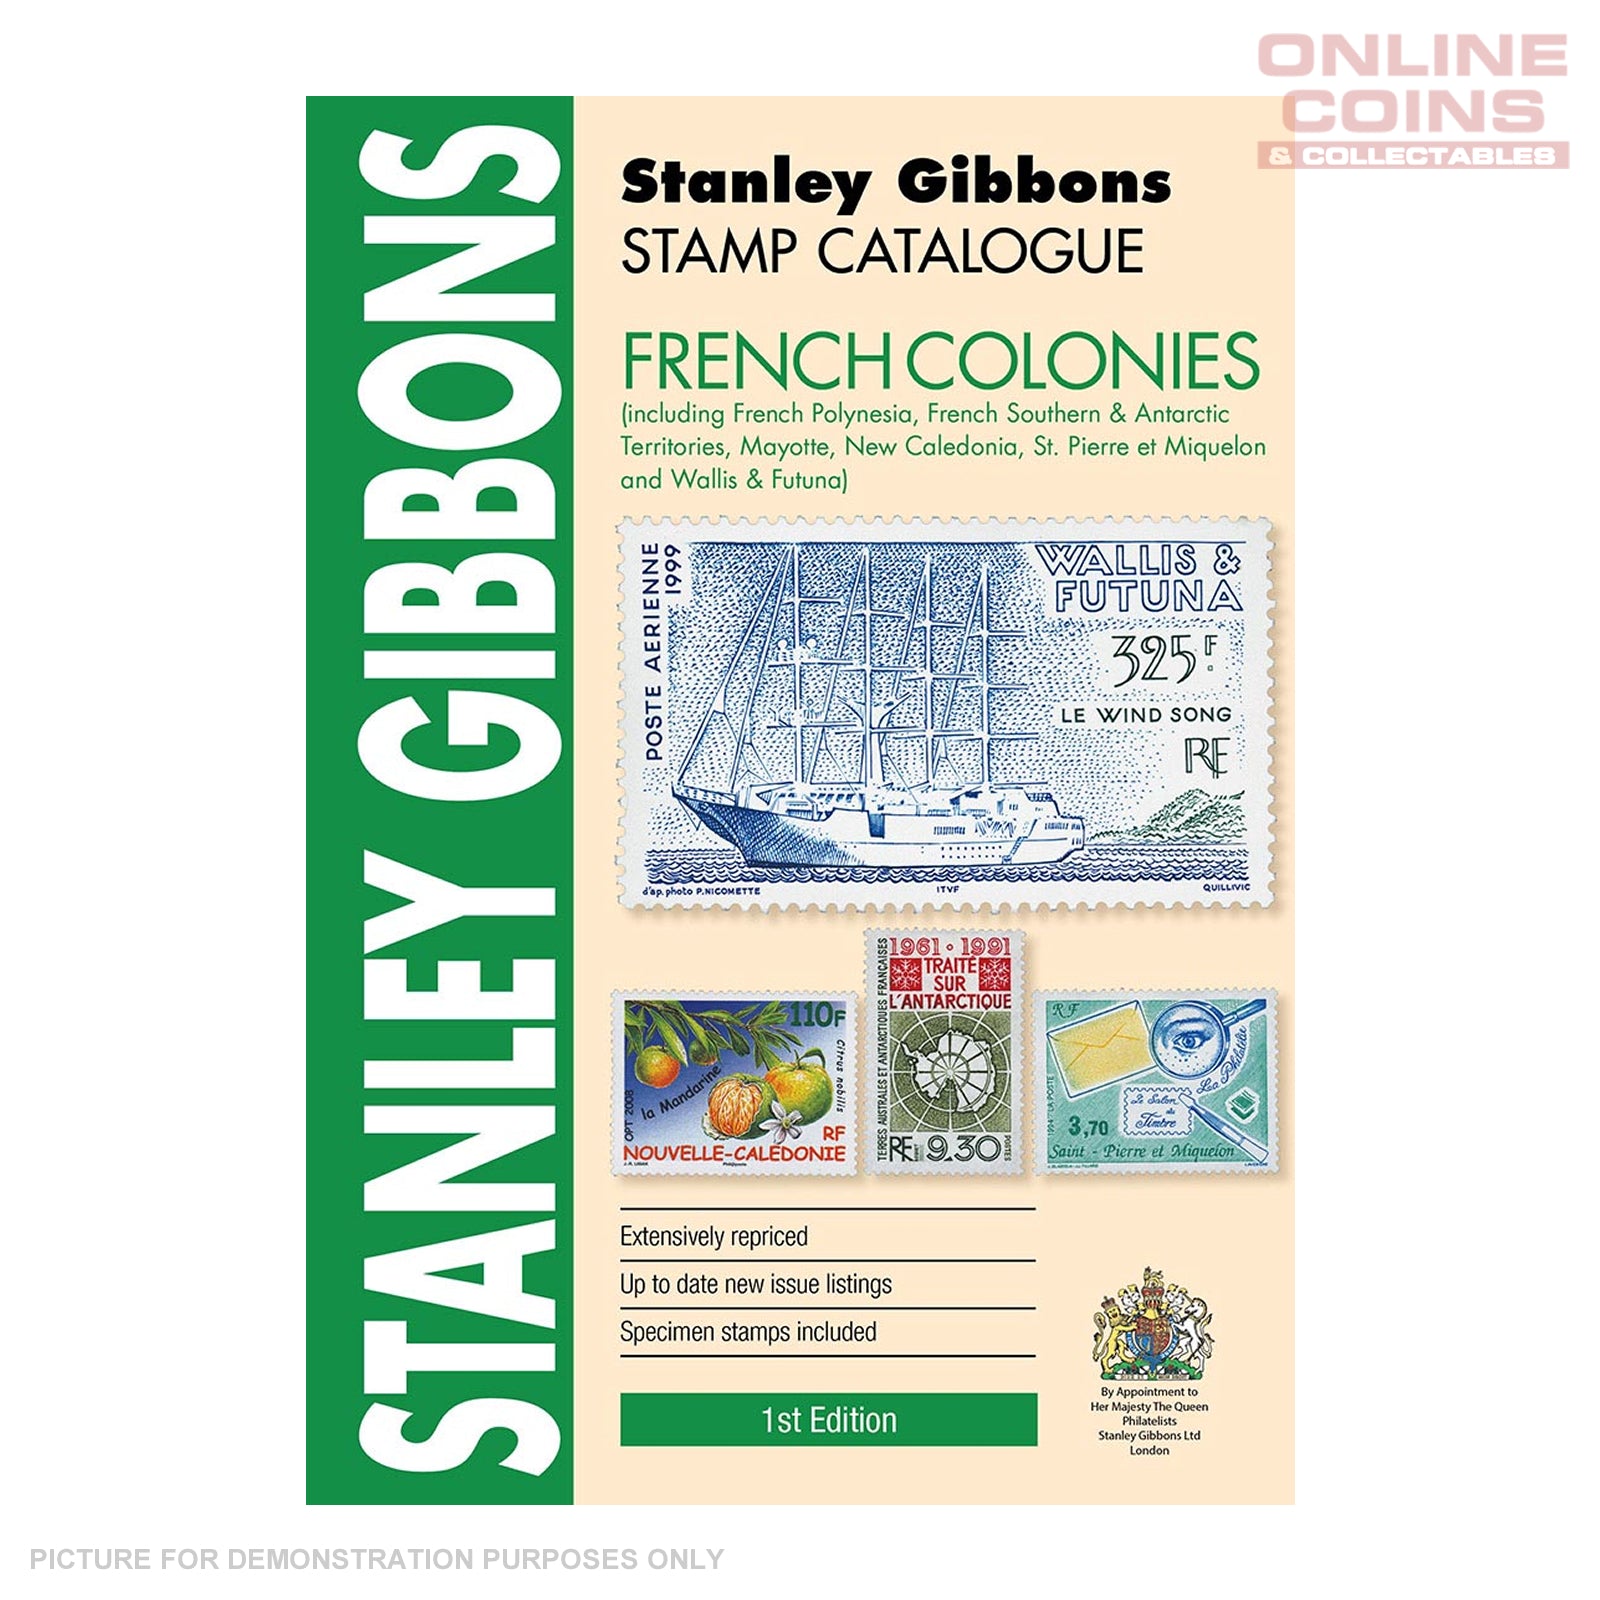 2016 Stanley Gibbons Stamp Catalogue French Colonies 1st Edition Soft Cover Book